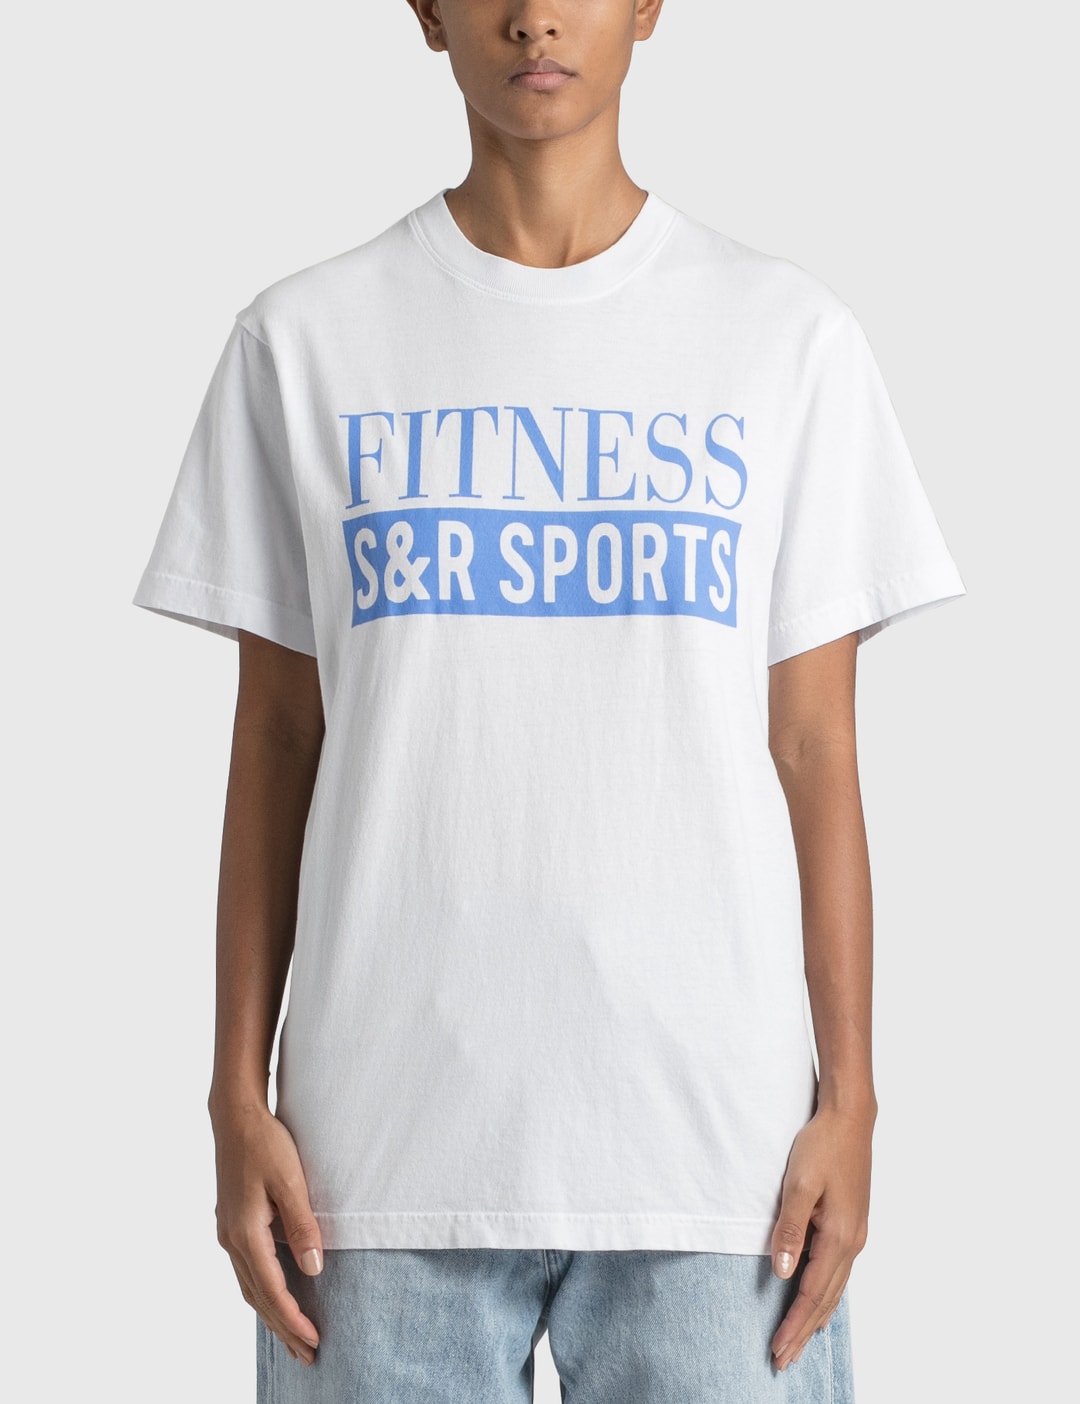 & Rich - S&R Fitness T-shirt | HBX - Globally Curated Fashion and by Hypebeast